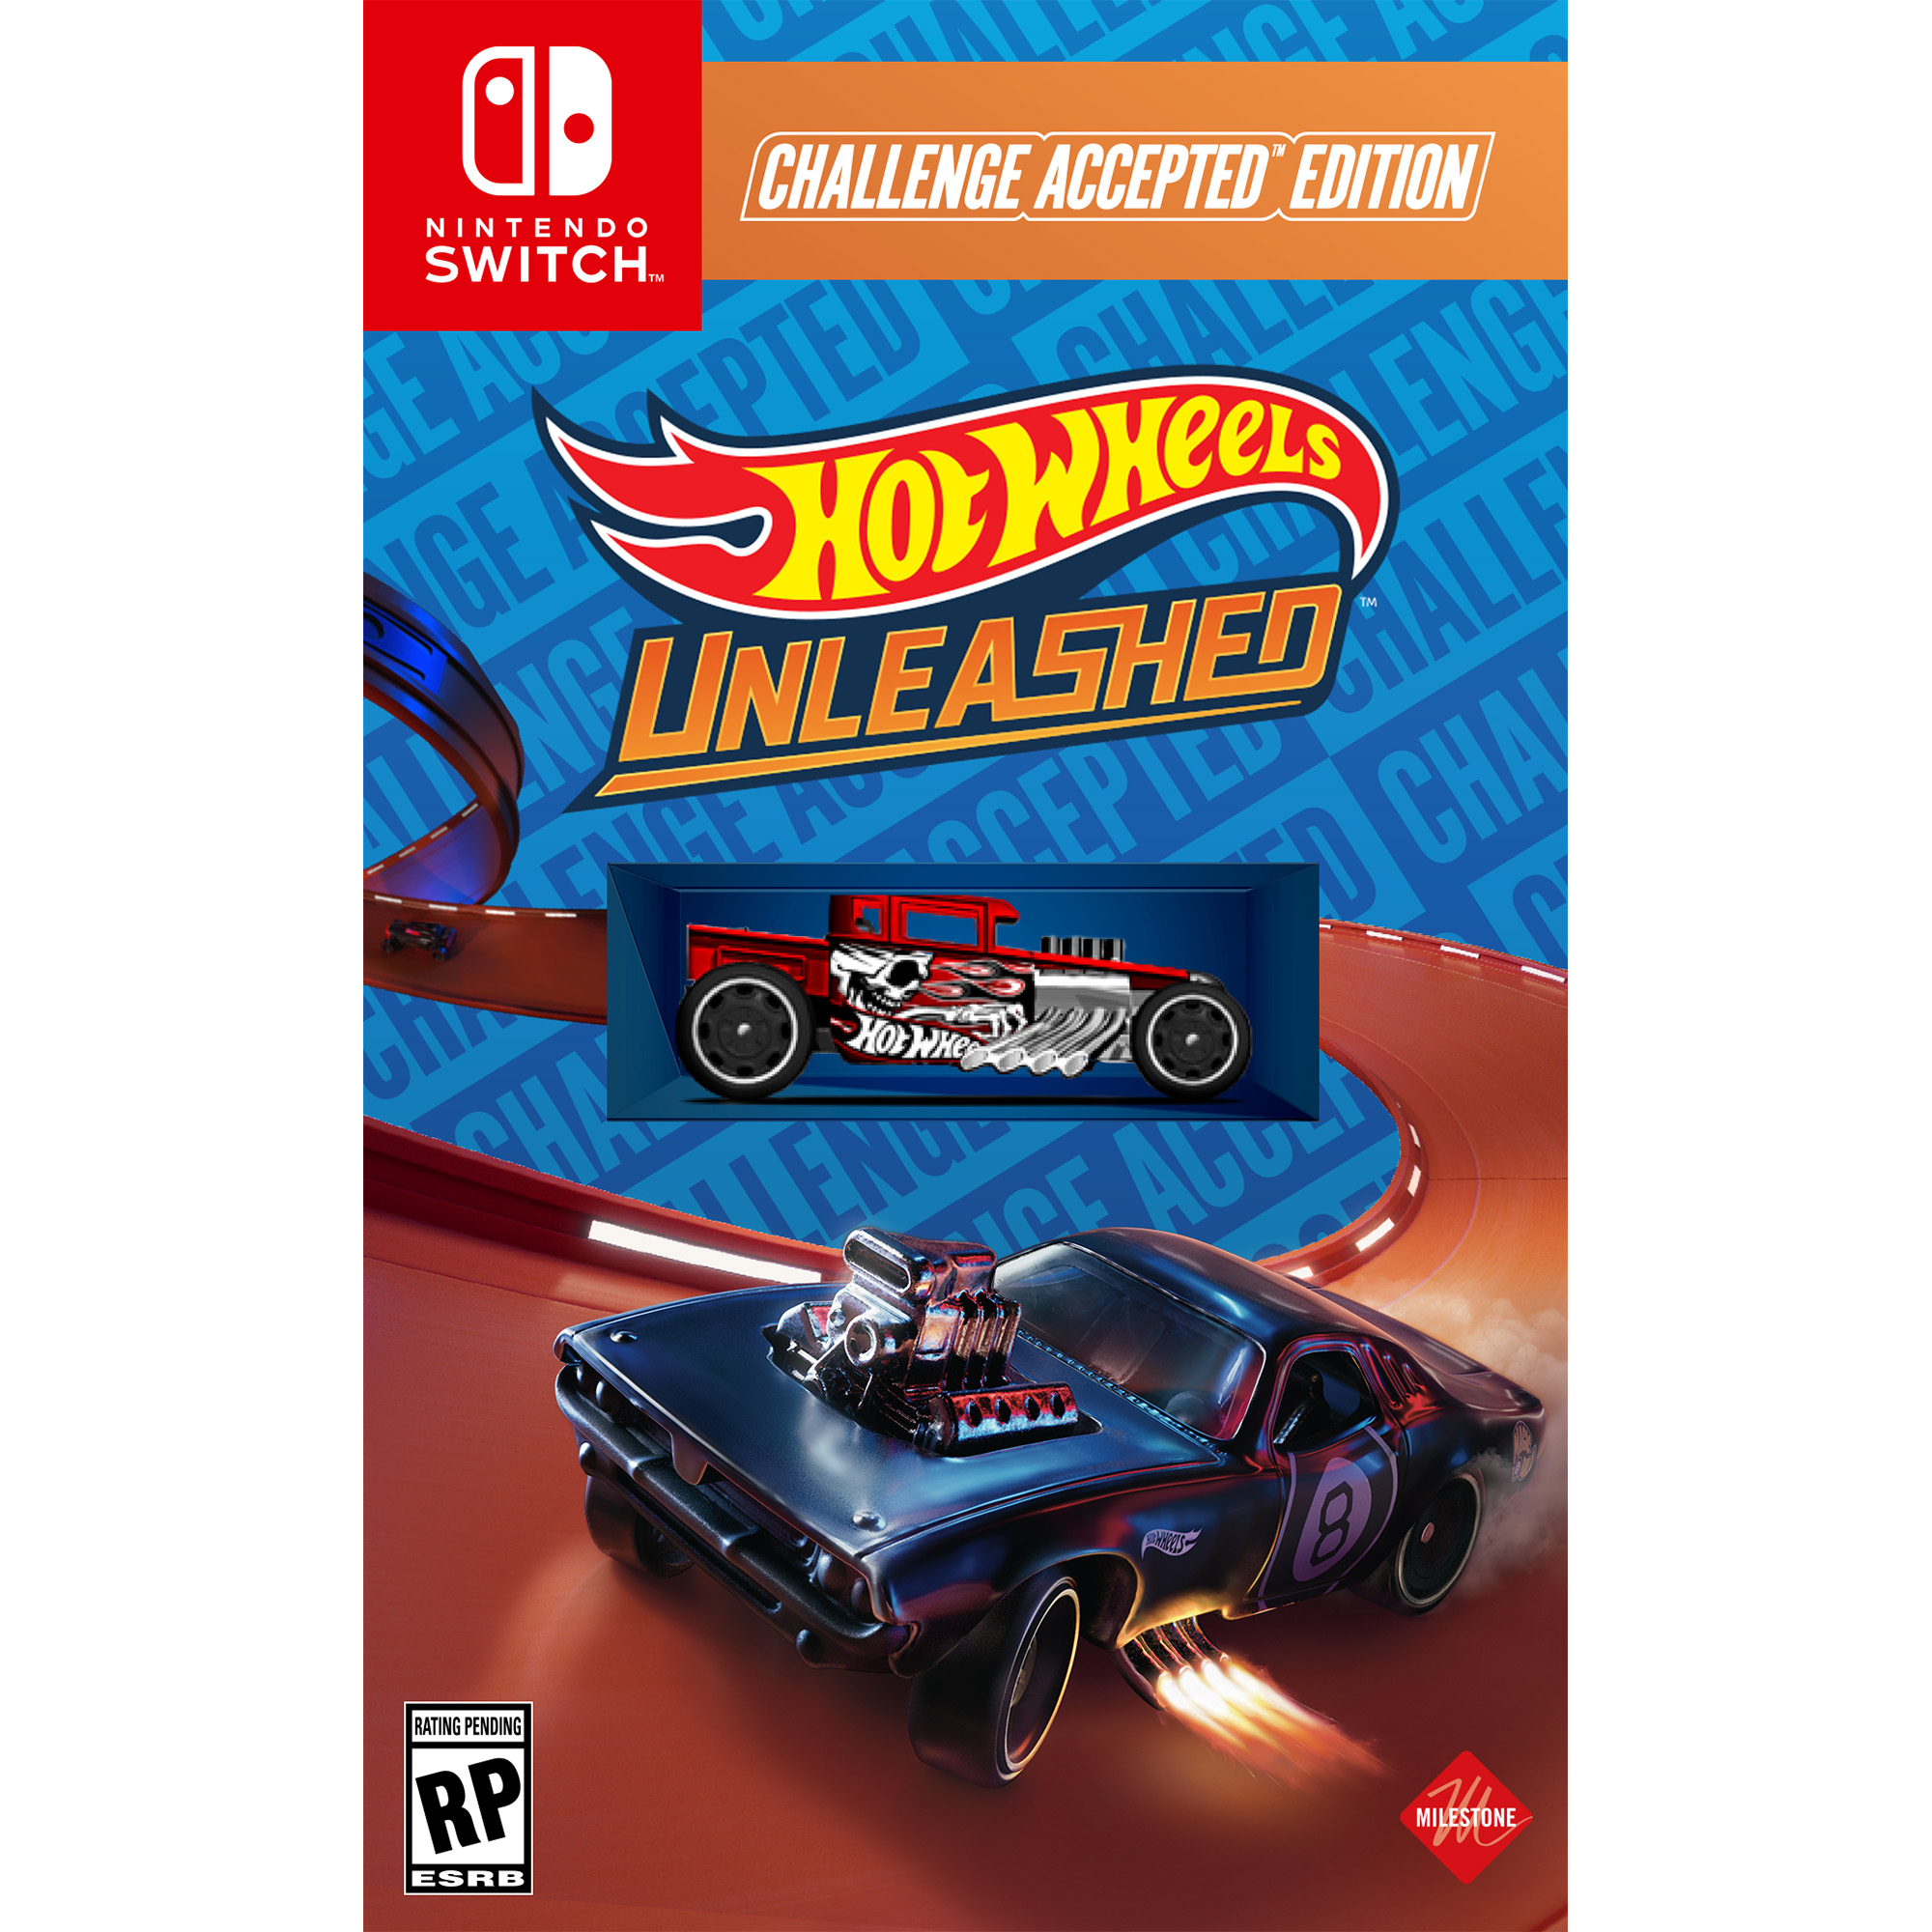 Walmart Exclusive: Hot Wheels Unleashed Challenge Accepted Edition, Koch Media, Nintendo Switch, [Physical], 816819019139 - image 1 of 16